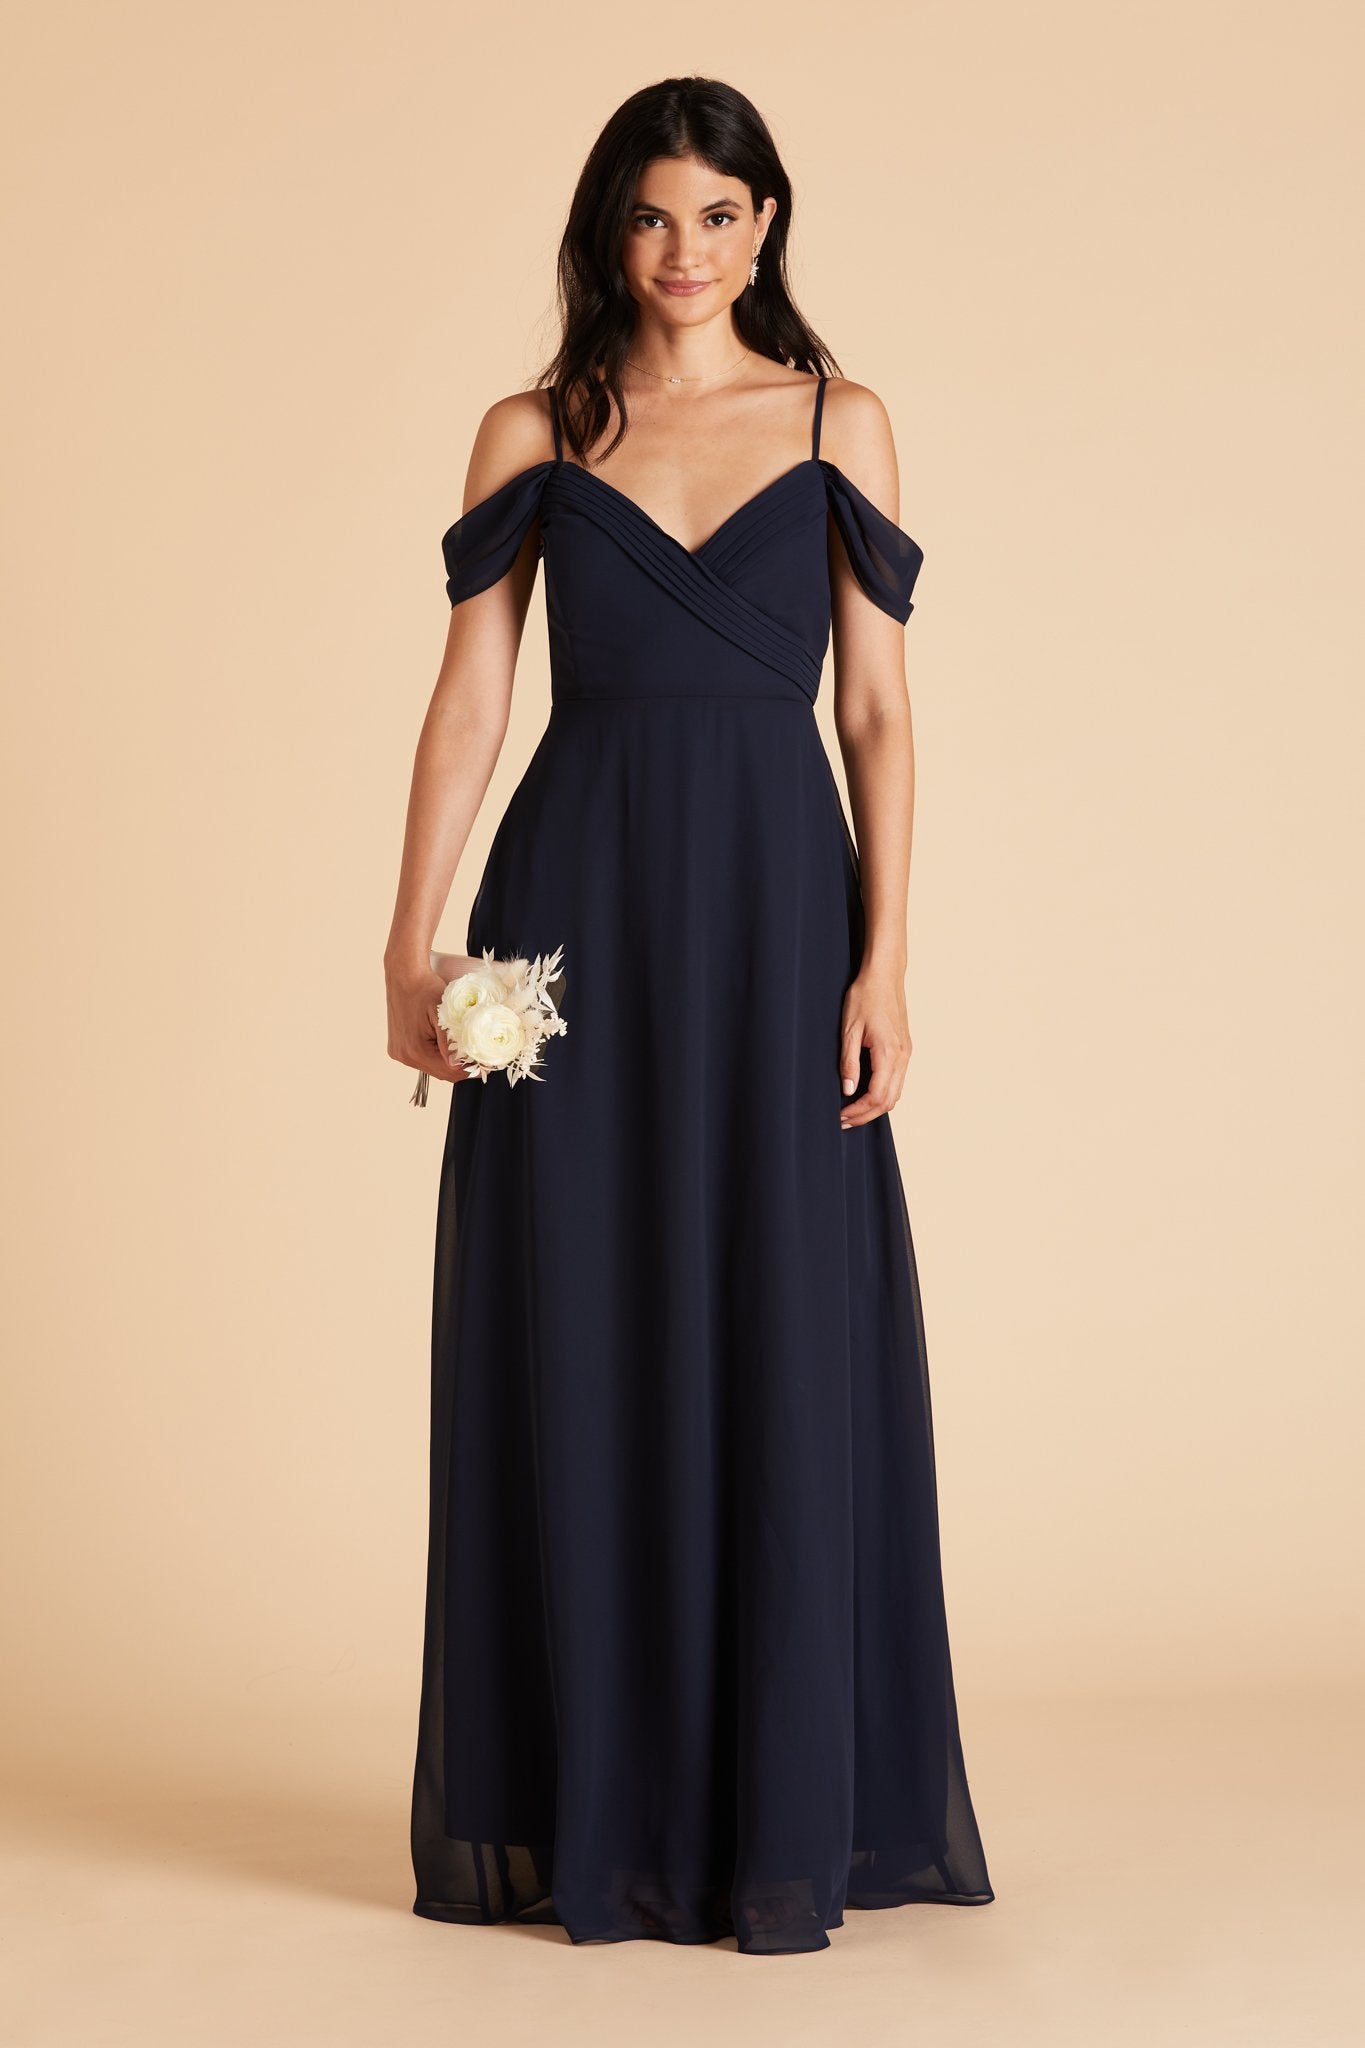 Spence convertible bridesmaid dress in navy blue chiffon by Birdy Grey, front view